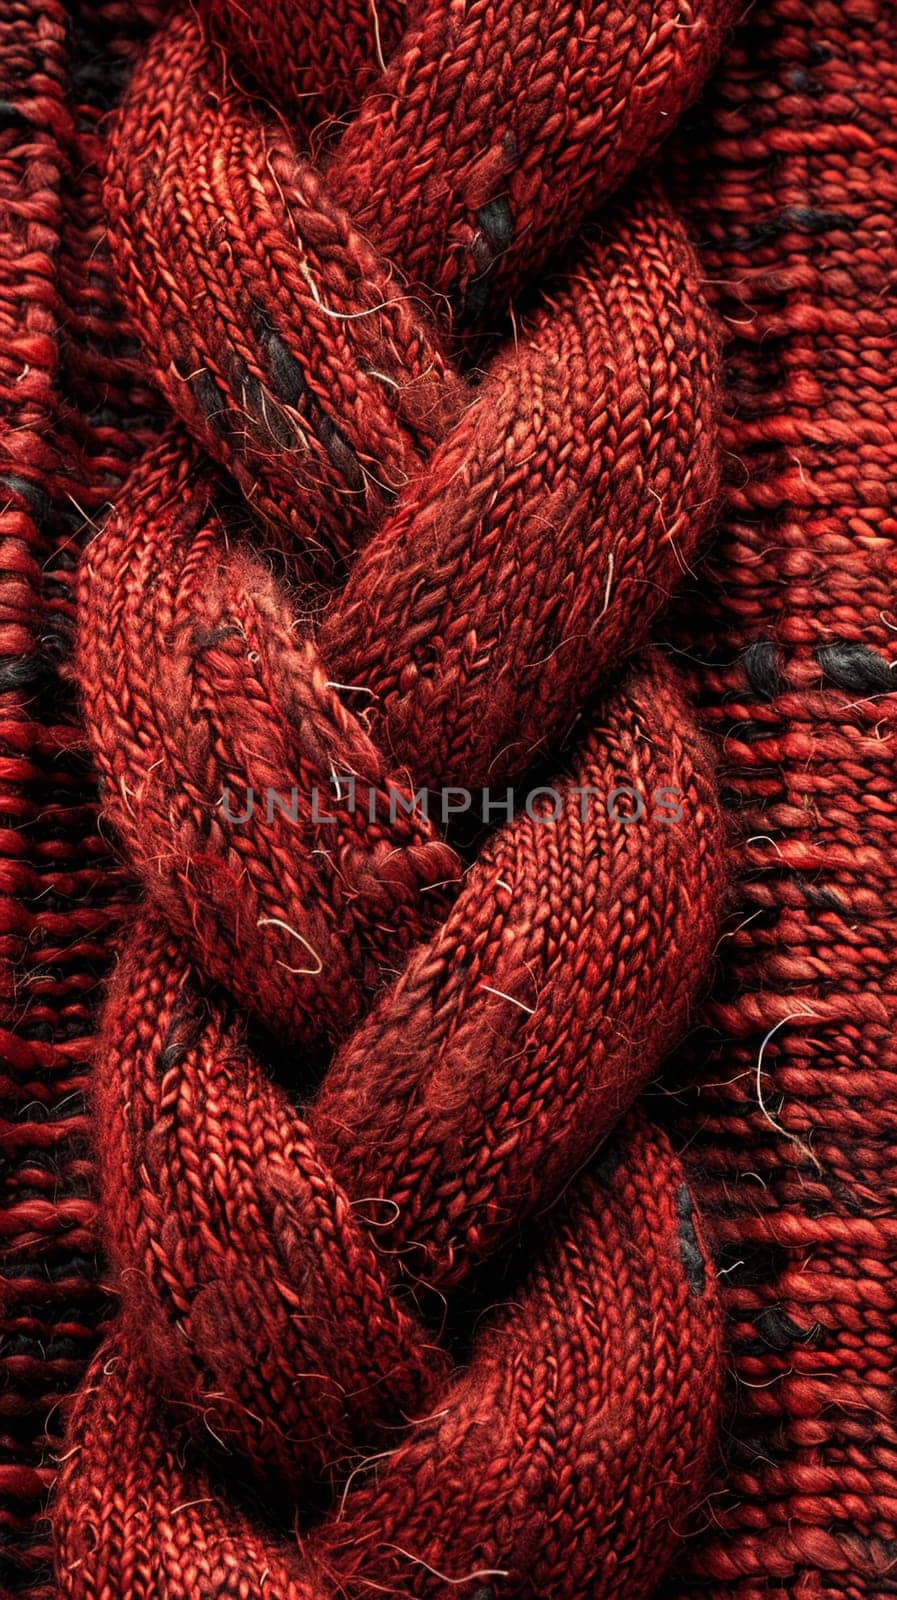 Close-up of woven fabric texture, suitable for fashion and textile backgrounds.